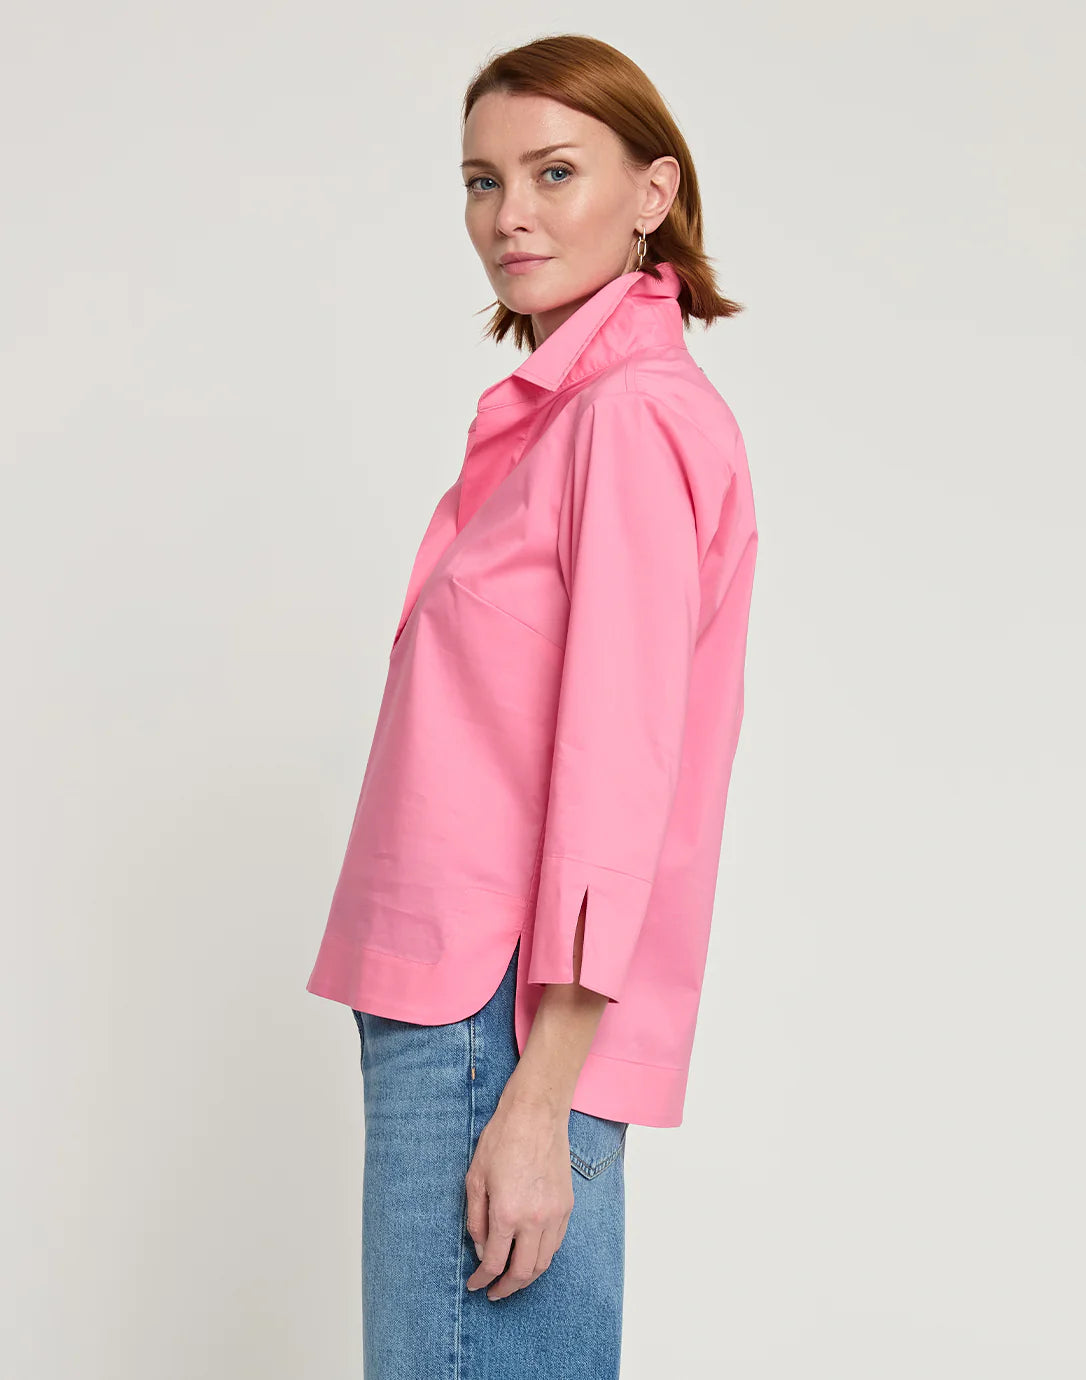 Aileen 3/4 Sleeve Blouse in Rose